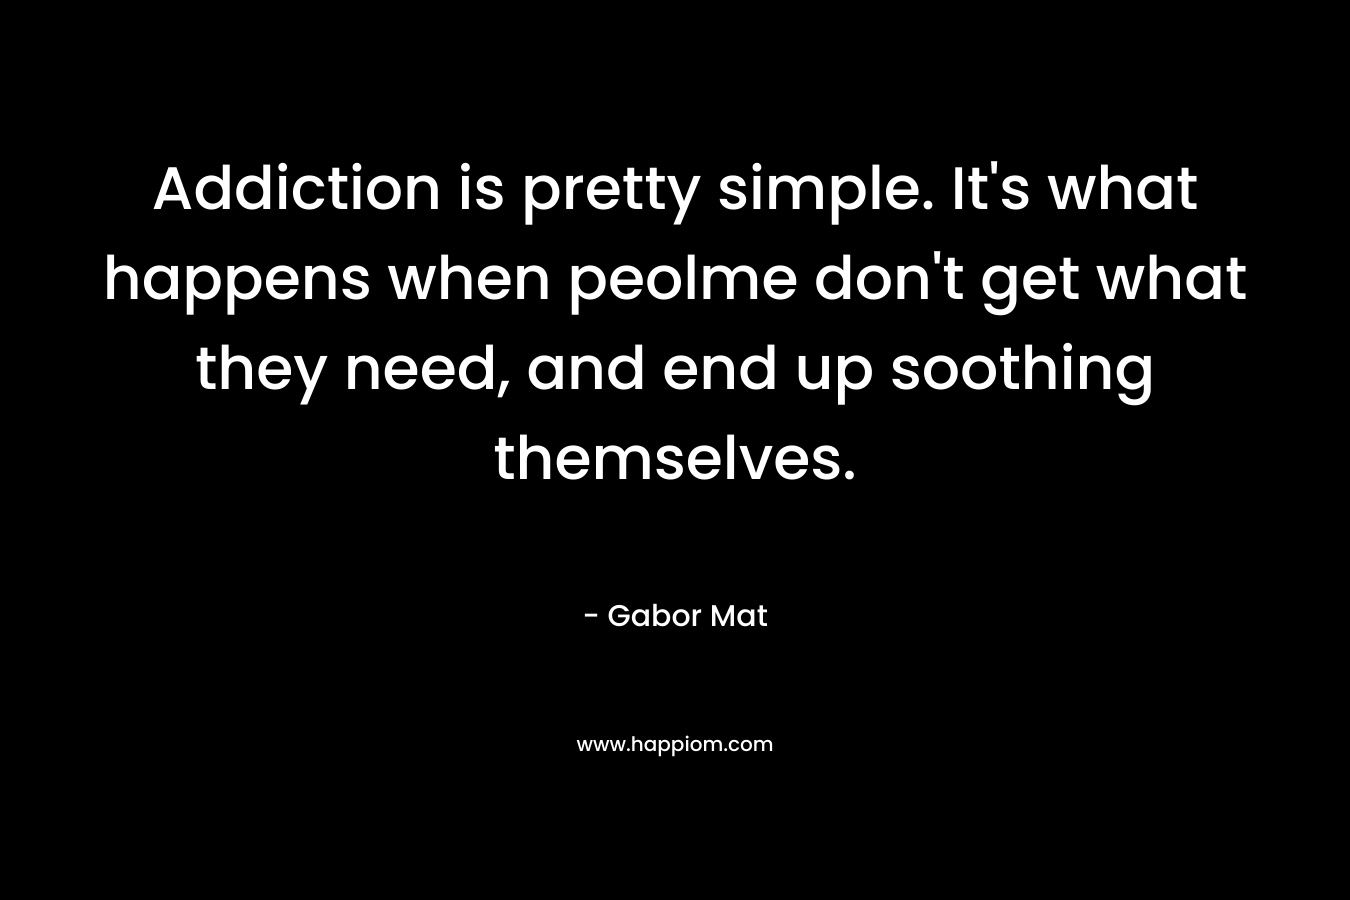 Addiction is pretty simple. It’s what happens when peolme don’t get what they need, and end up soothing themselves. – Gabor Mat